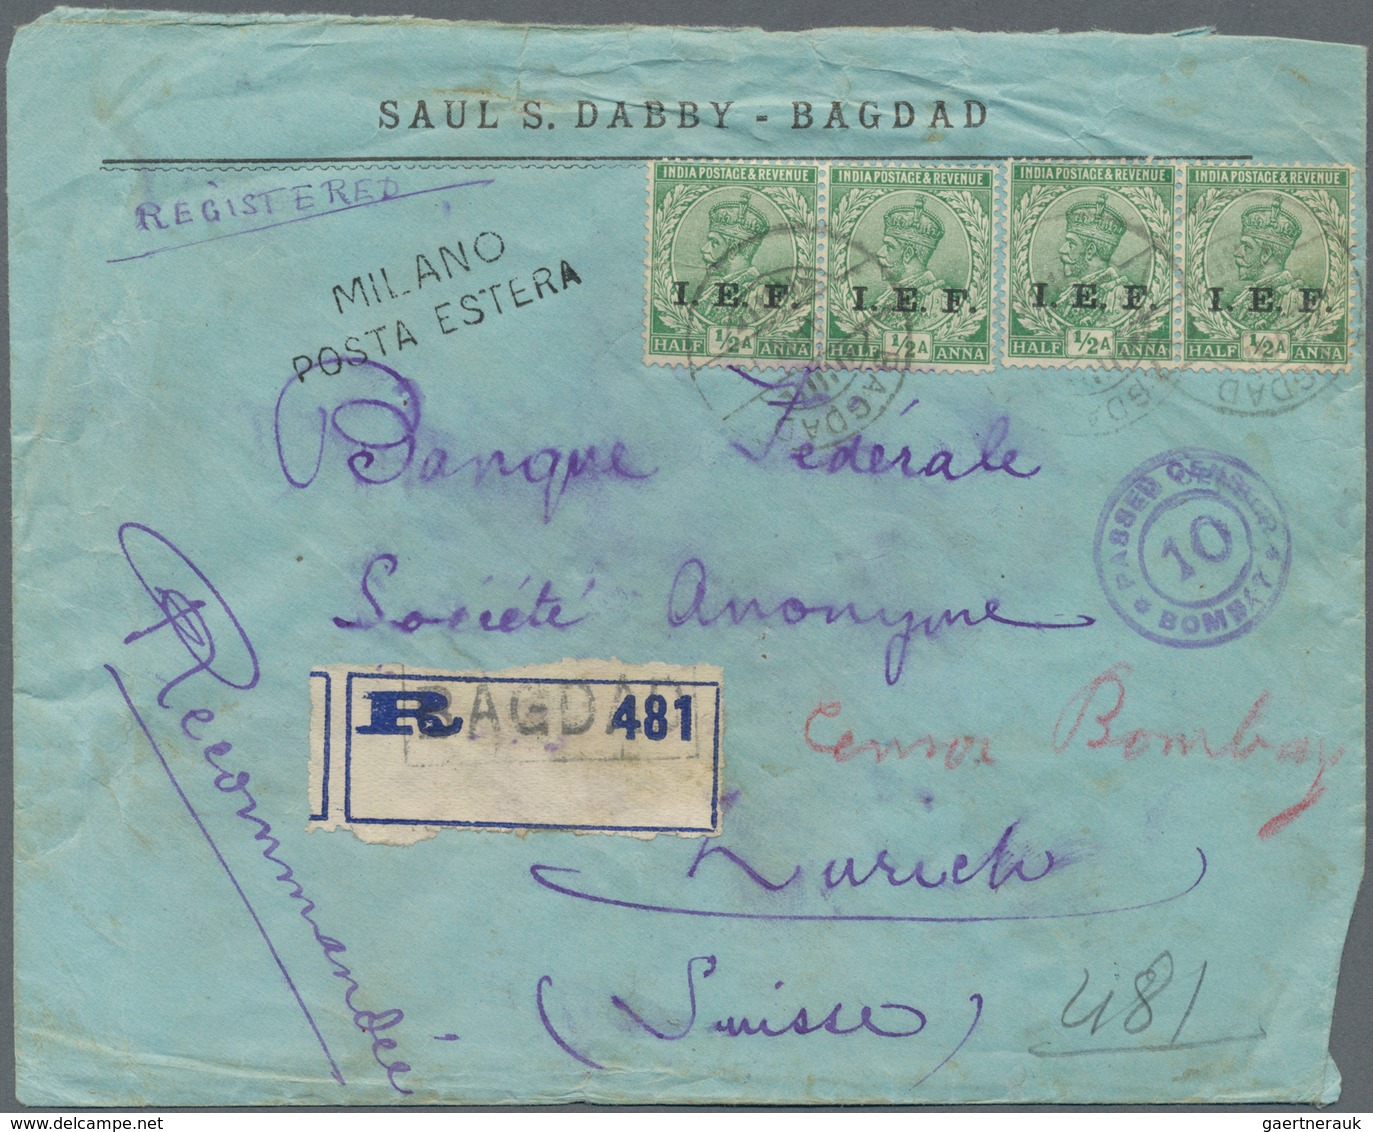 Indien - Feldpost: 1918 Registered And Censored Cover From Baghdad To Zurich, Switzerland Via Milan, - Franquicia Militar